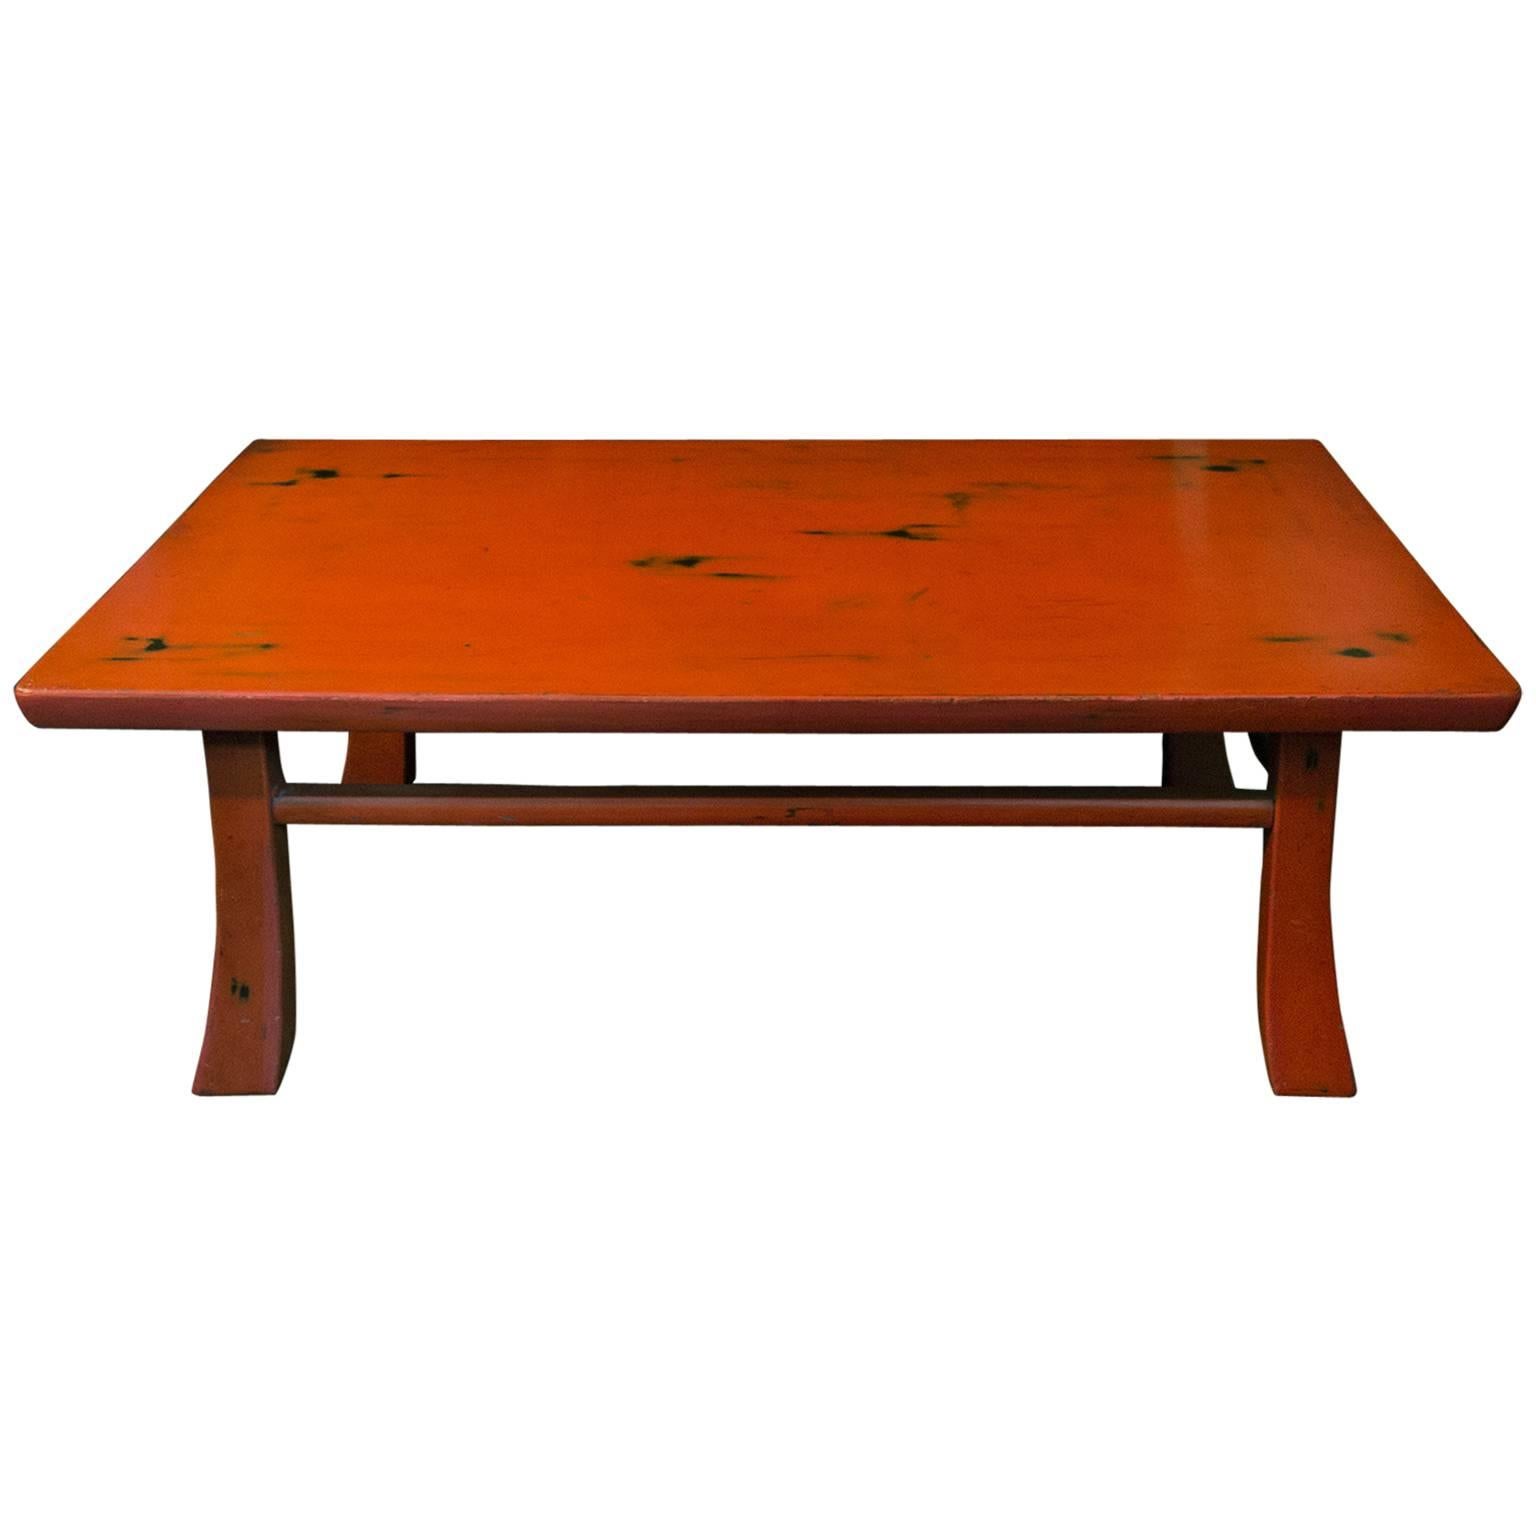 Vintage Japanese Style Negoro Nuri Lacquer Low Table For Sale